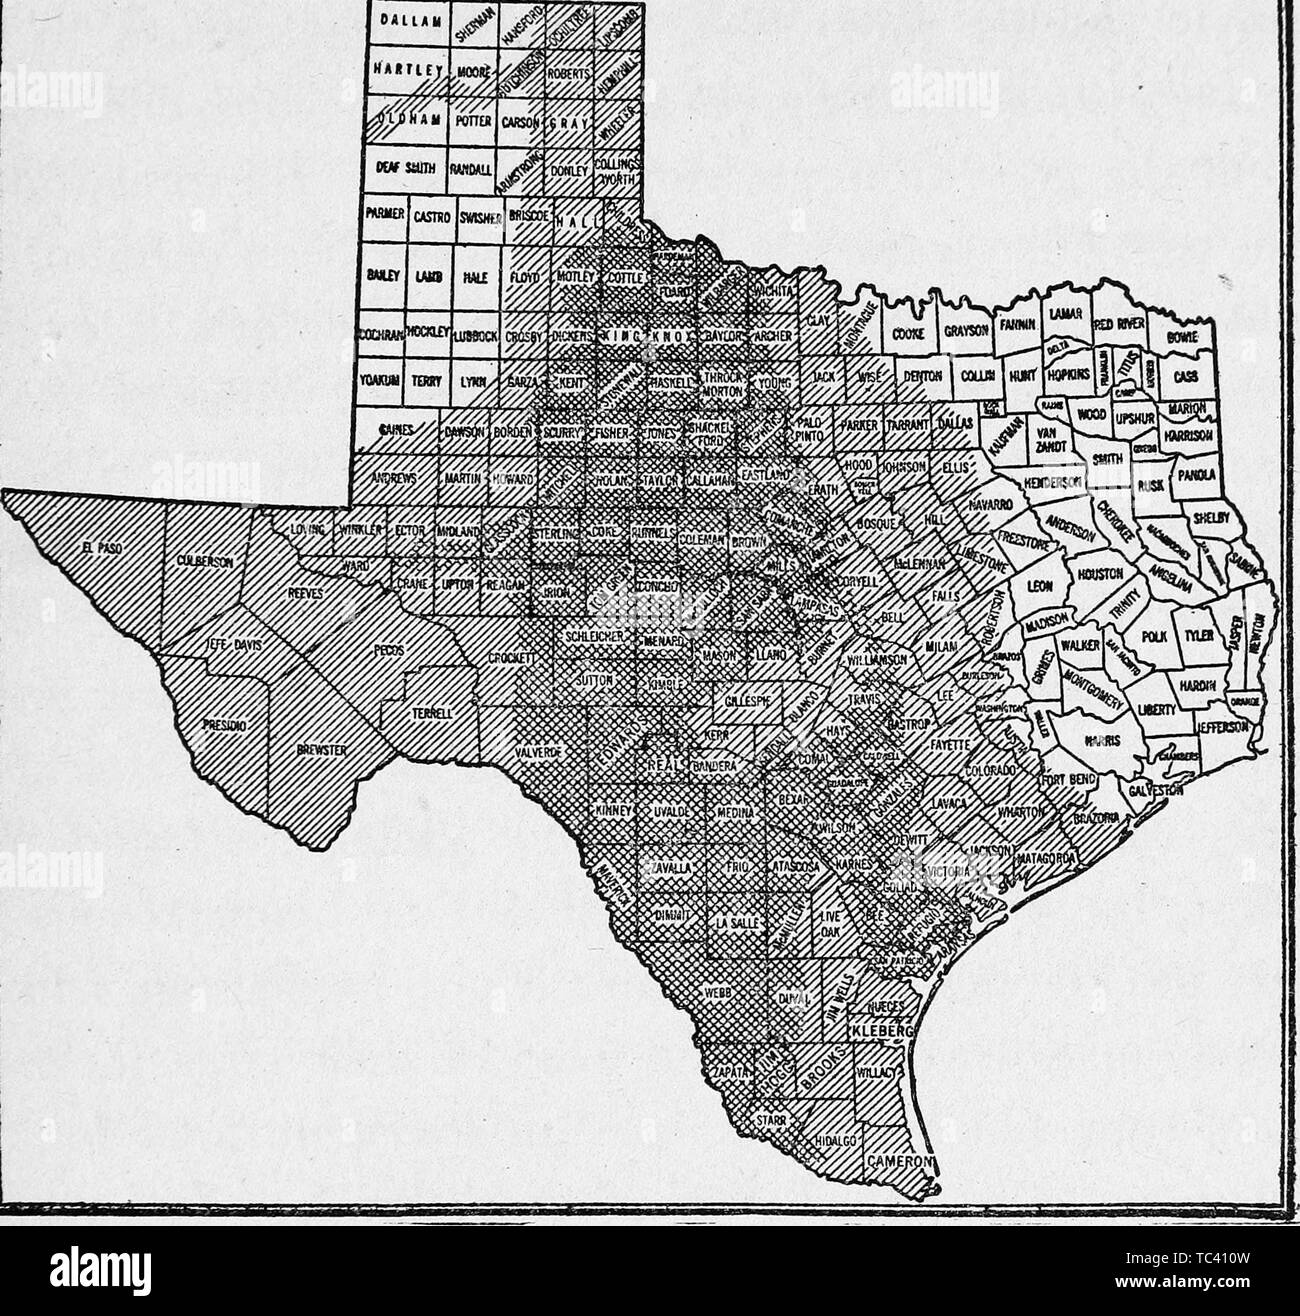 Engraved map of Mesquite distribution, Bureau of Forestry, U. S. Department of Agriculture, from the book 'Book of Texas' by Harry Yandell Benedict and John A. Lomax, 1916. Courtesy Internet Archive. () Stock Photo